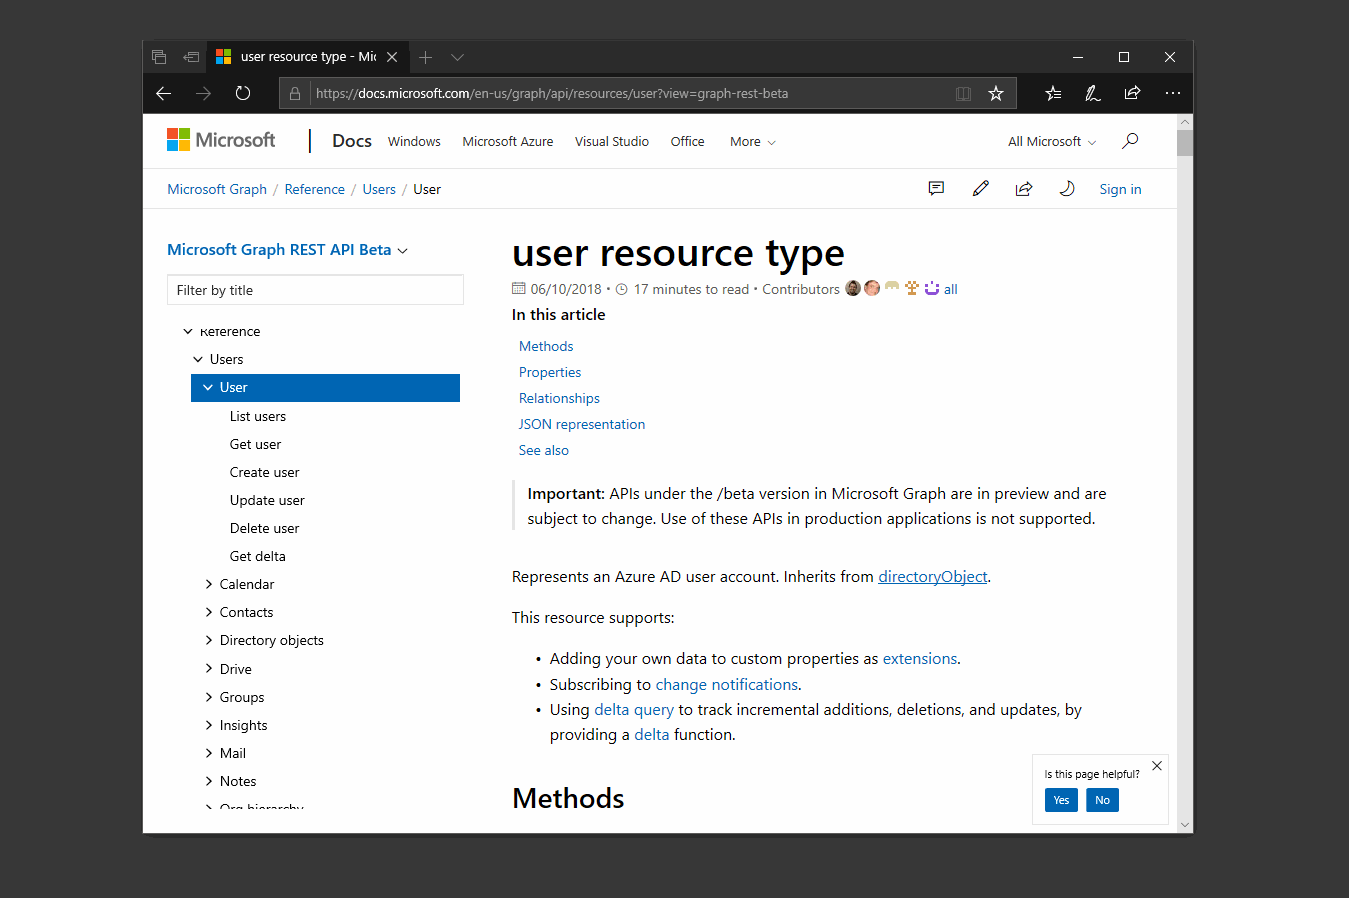 Version switcher for Microsoft Graph reference documentation